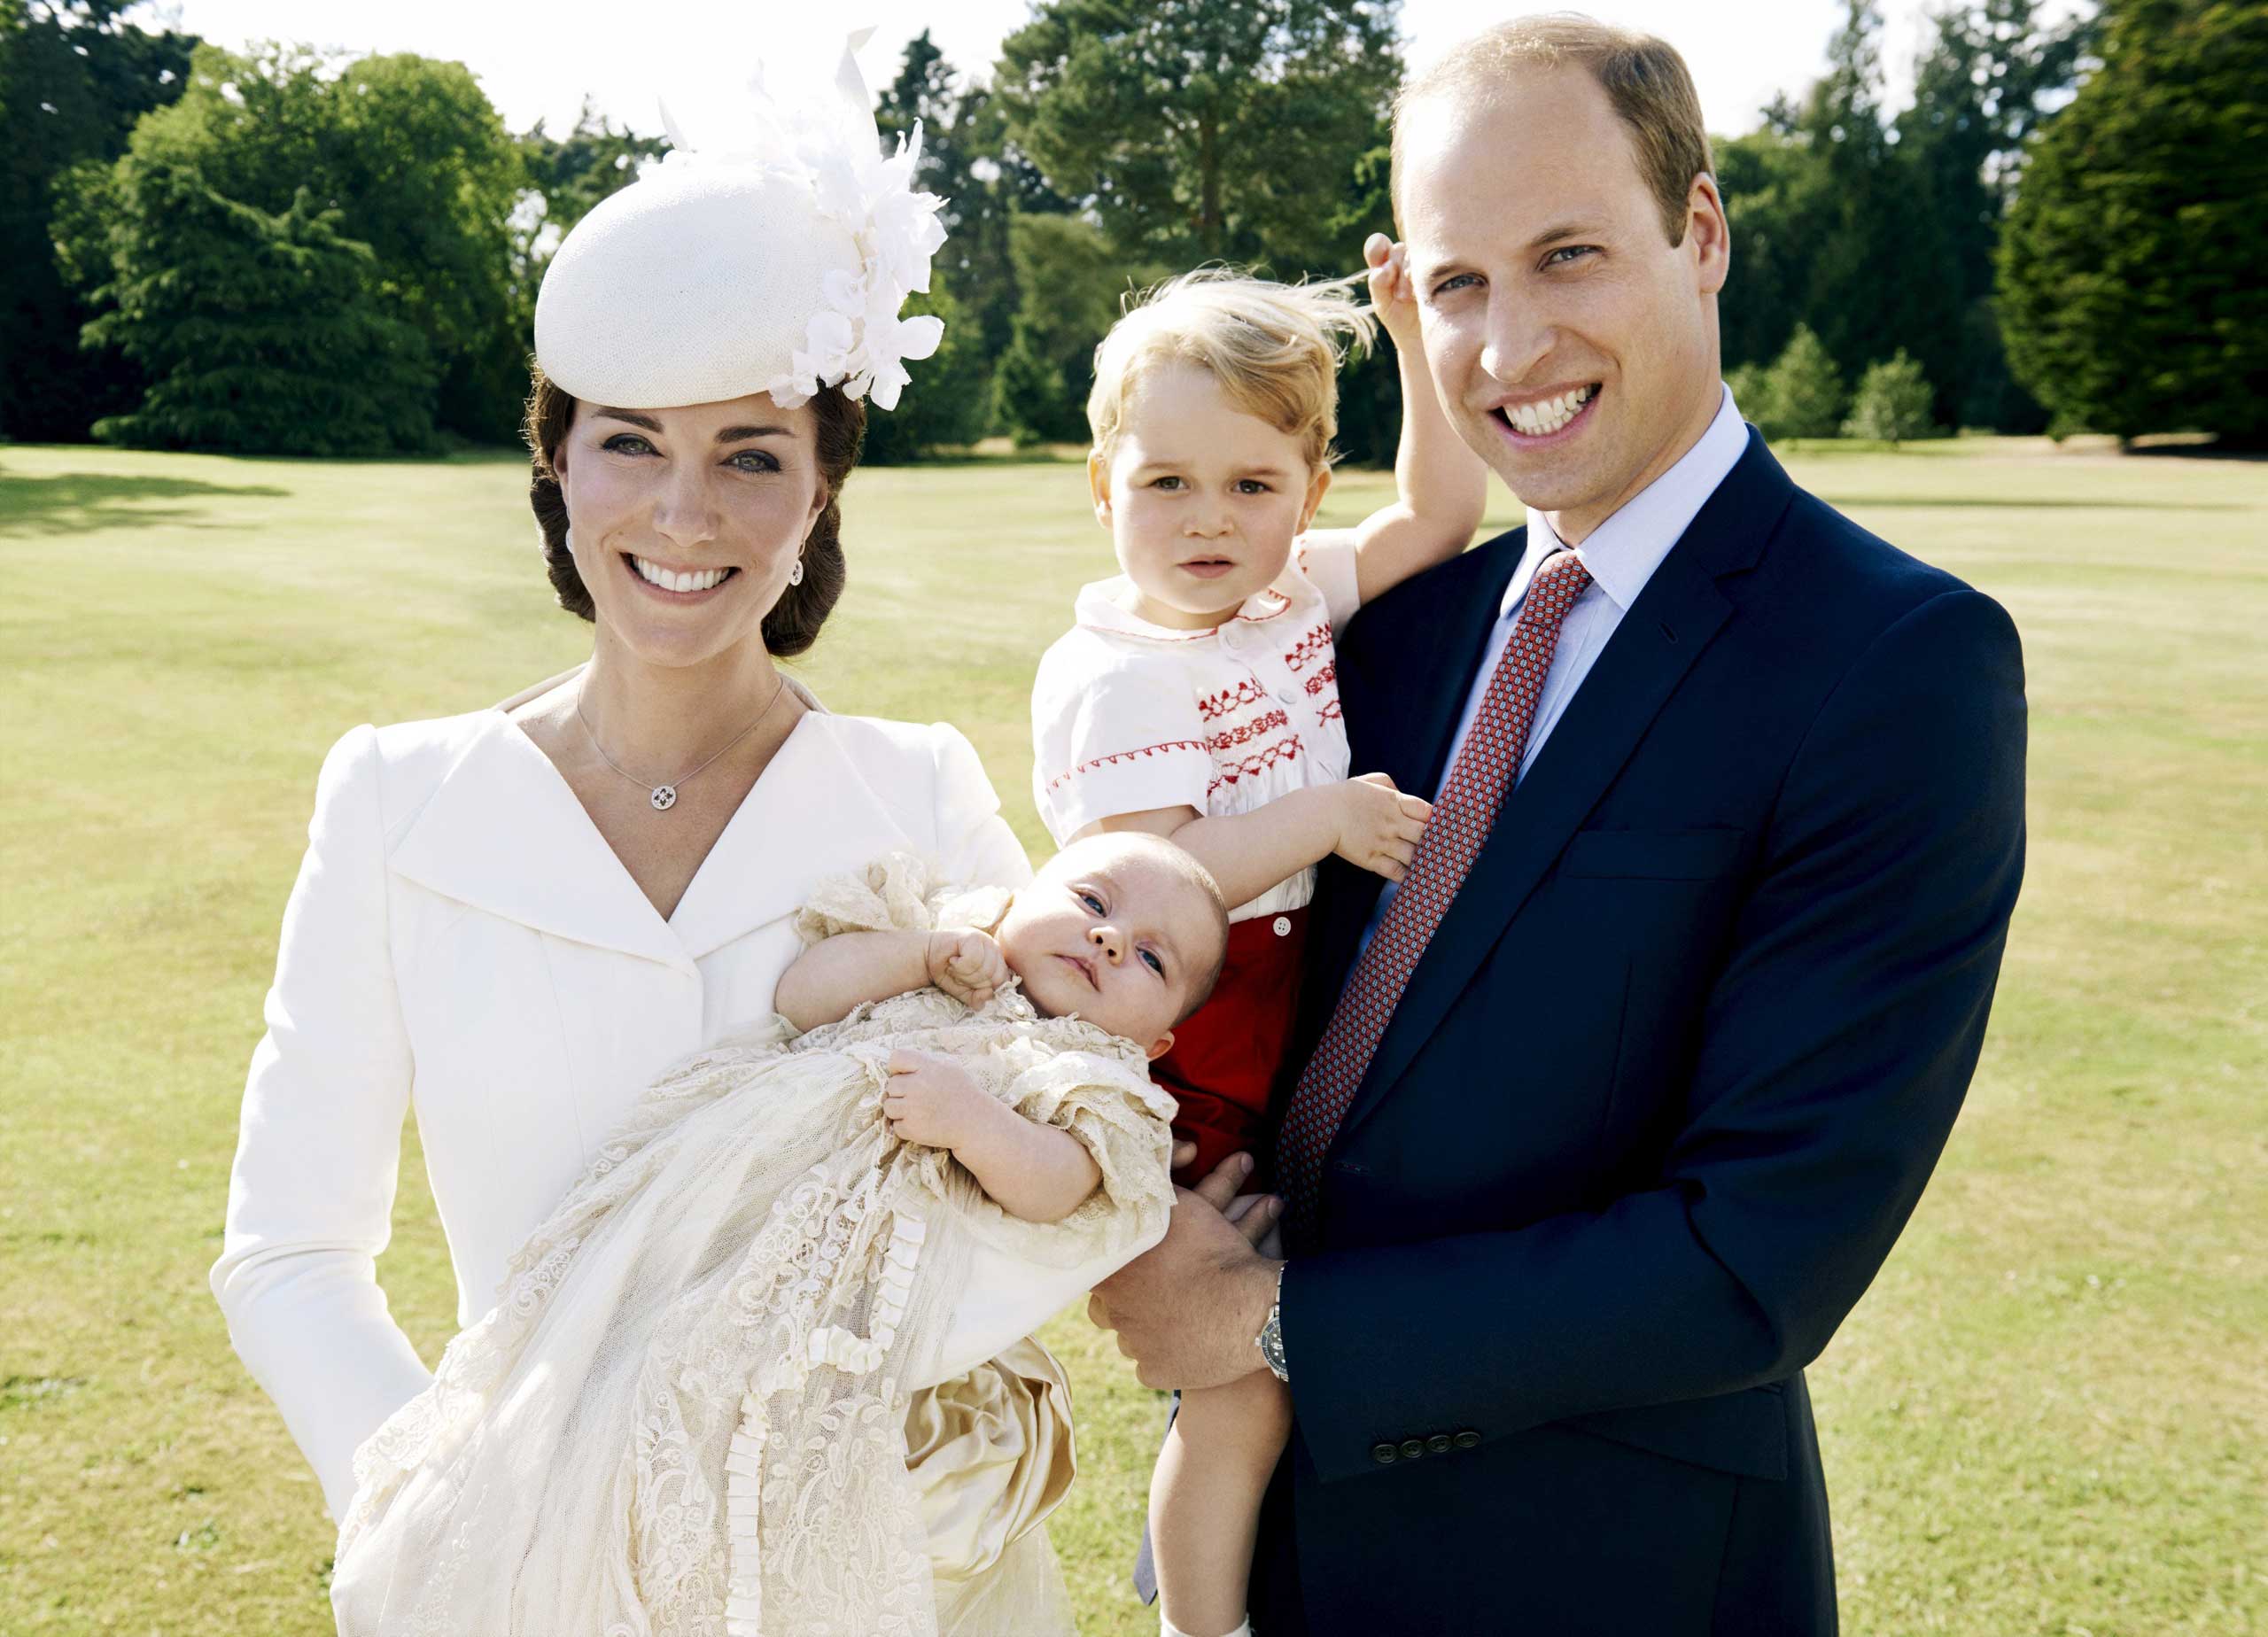 Britain's Prince William and Catherine, the Duchess of Cambridge, with their children, Prince George and Princess Charlotte, who was christened at Sandringham, United Kingdom.